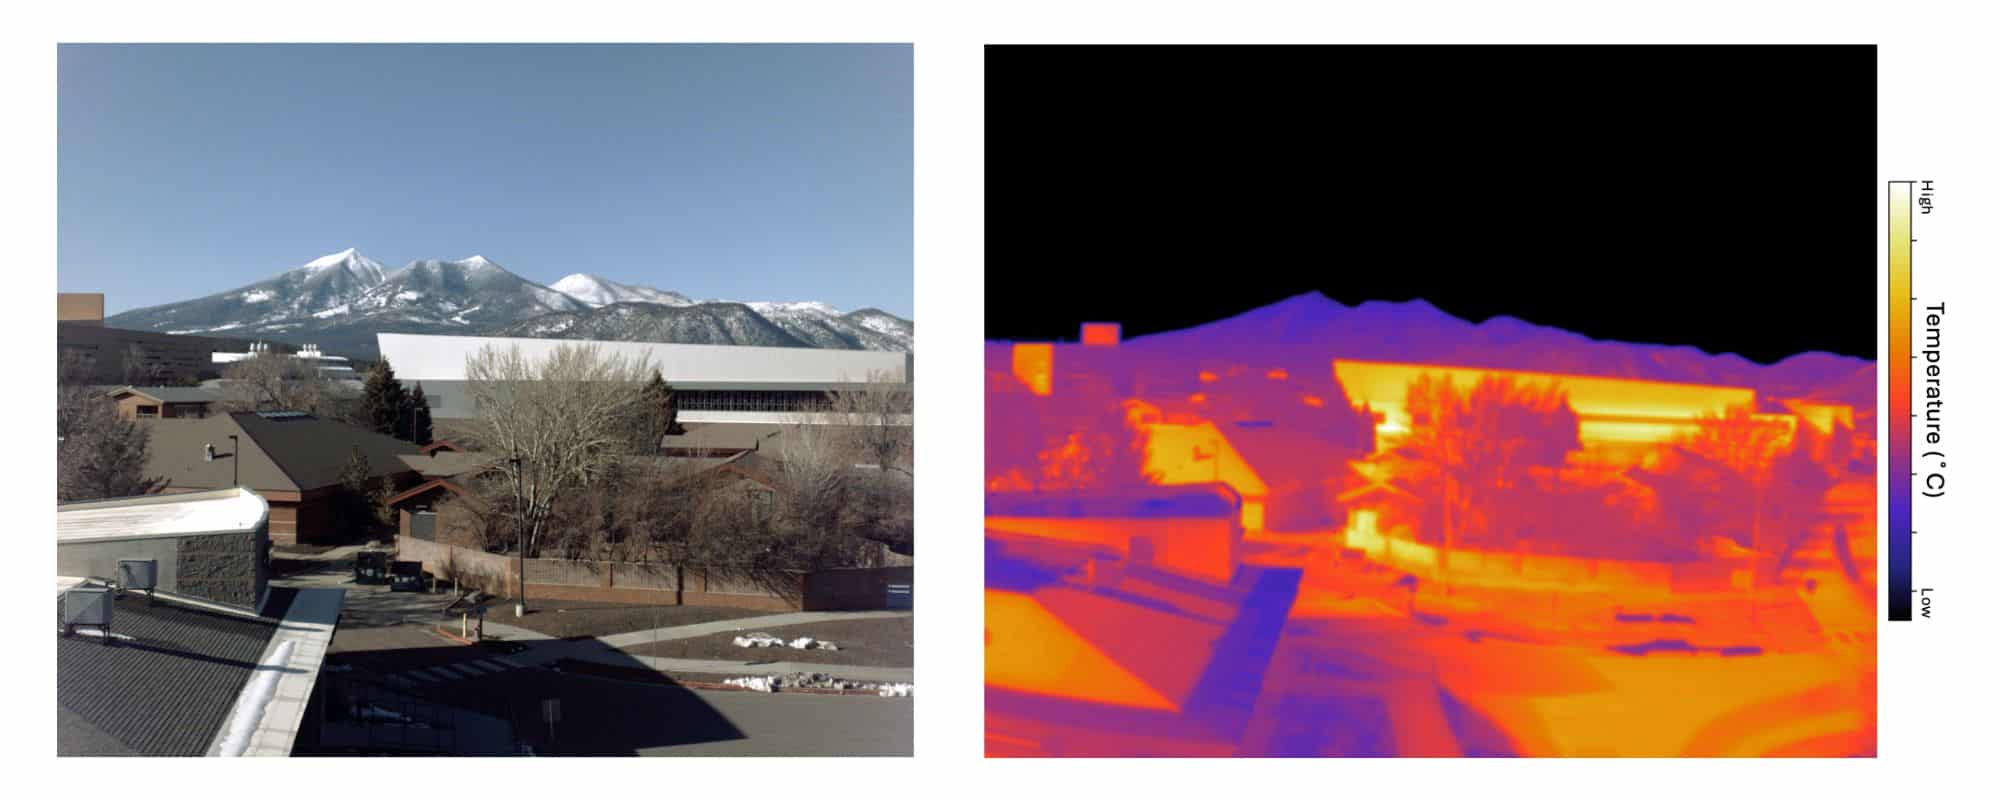 Side by side photos of the peaks in the visible and infrared spectrums taken with the VISIONS camera.